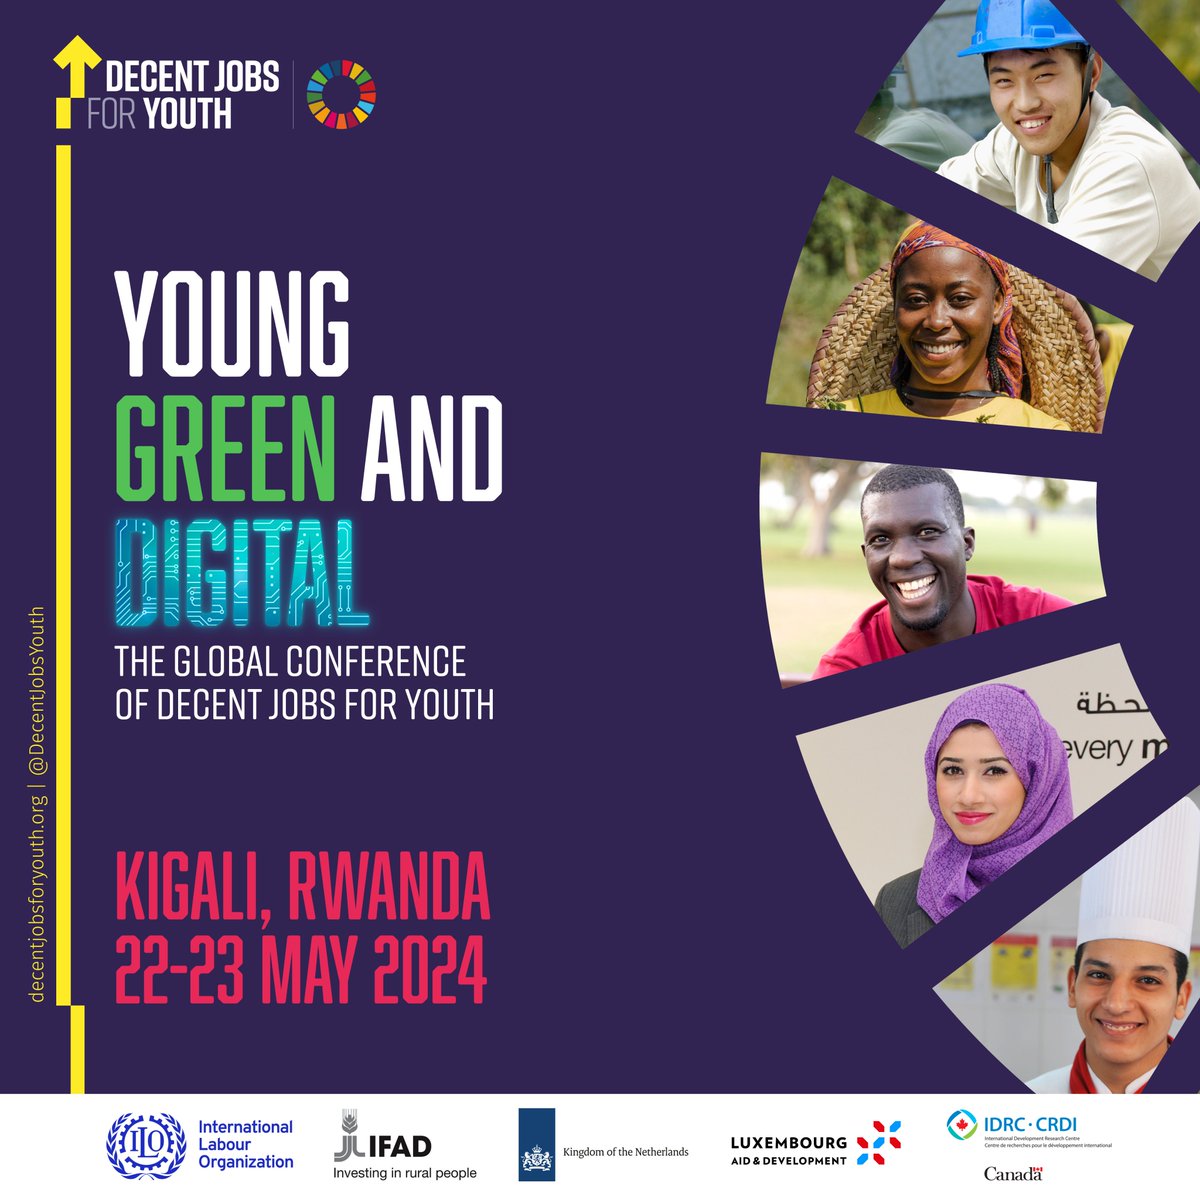 Heading to the Global Conference of #DecentJobsForYouth next week? You might run into VVOB's Rita Rhoda Akello and @maud_seghers! They're keen to connect with like-minded organisations advancing skilling and youth employment for dignified, green economic opportunities 🙌🌱